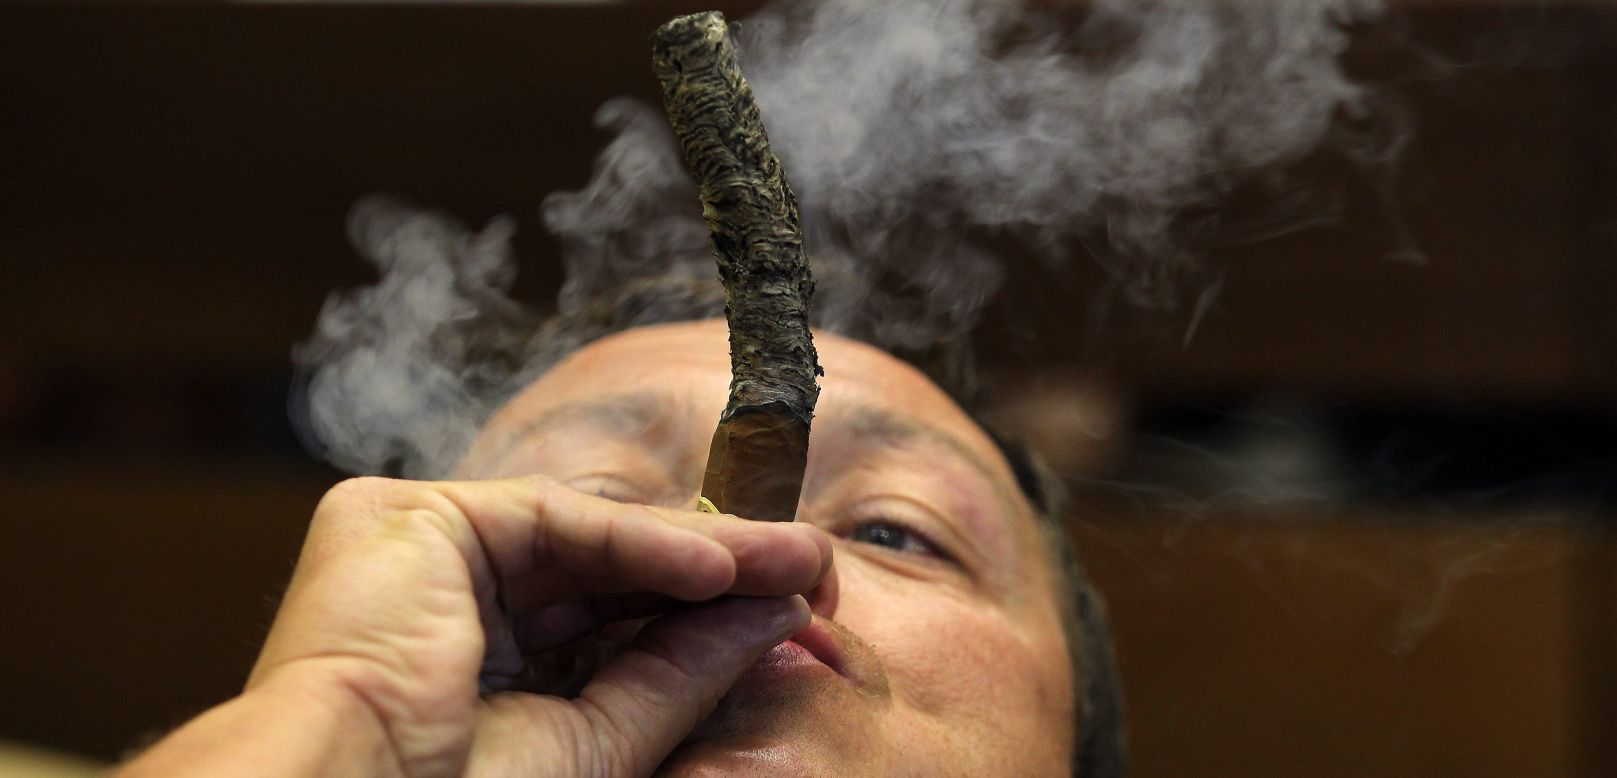 A man participates in a contest to see who can keep the longest cigar ash during the Cigar Festival in Havana, Cuba, on Thursday, February 26.